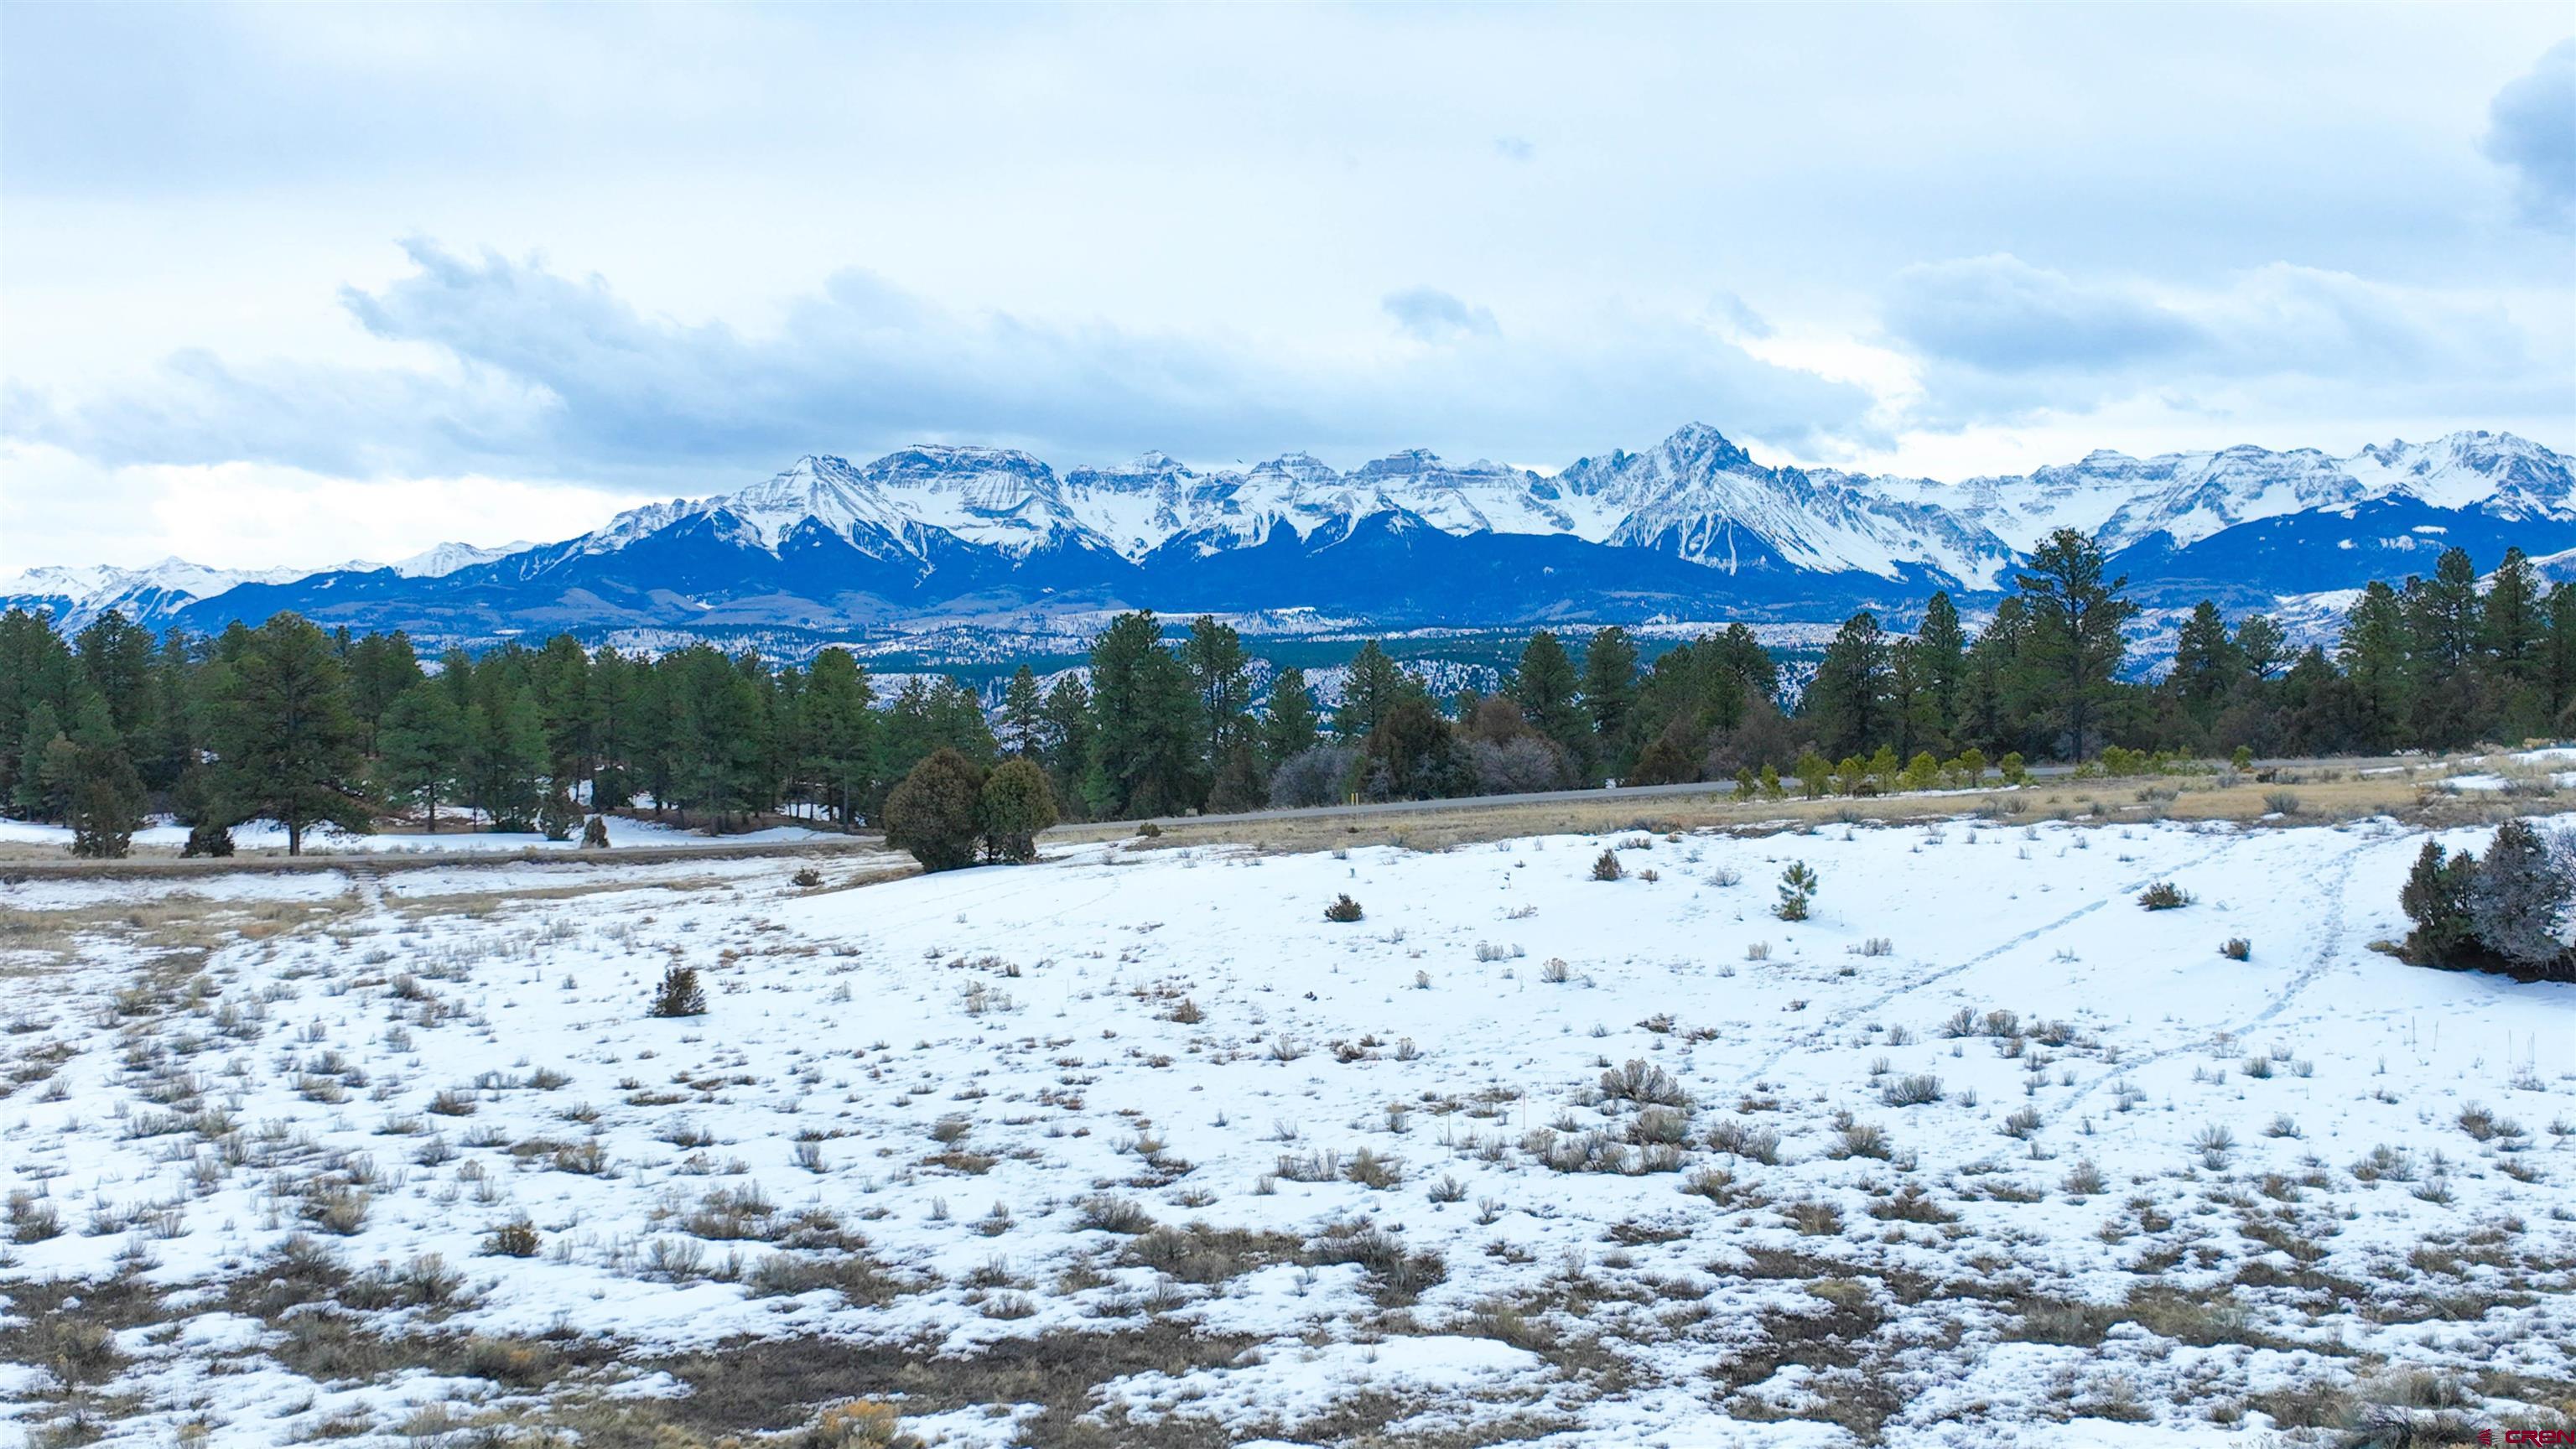 This 3+ acre parcel of land offers a unique opportunity to build a stunning home, nestled in the heart of Colorado's recreation-rich San Juan Range. The direct views of the San Juan and Cimarron Mountain Ranges, including a clear view of Mt. Sneffels, make this property a rare find. Additionally, its location adjacent to a vast open space and overlooking the #3 Fairway and green of Divide Ranch and Club. The property's elevated location also provides a high-mesa forest of pinon, juniper, and ponderosa pine, and breathtaking views of four Rocky Mountain peaks in Southern Colorado near Telluride. Its location is conveniently situated, just four miles from Ridgway, less than 30 miles from Montrose and its regional airport, and a short drive from Telluride, Ouray, and Black Canyon National Park.  This parcel of land offers a rare opportunity to create a homesite in an area surrounded by natural beauty and recreational opportunities. Its location and features make it a highly desirable option for those looking to build a dream home in a picturesque and accessible location. We encourage you to seize this opportunity and schedule a viewing of this exceptional property today.